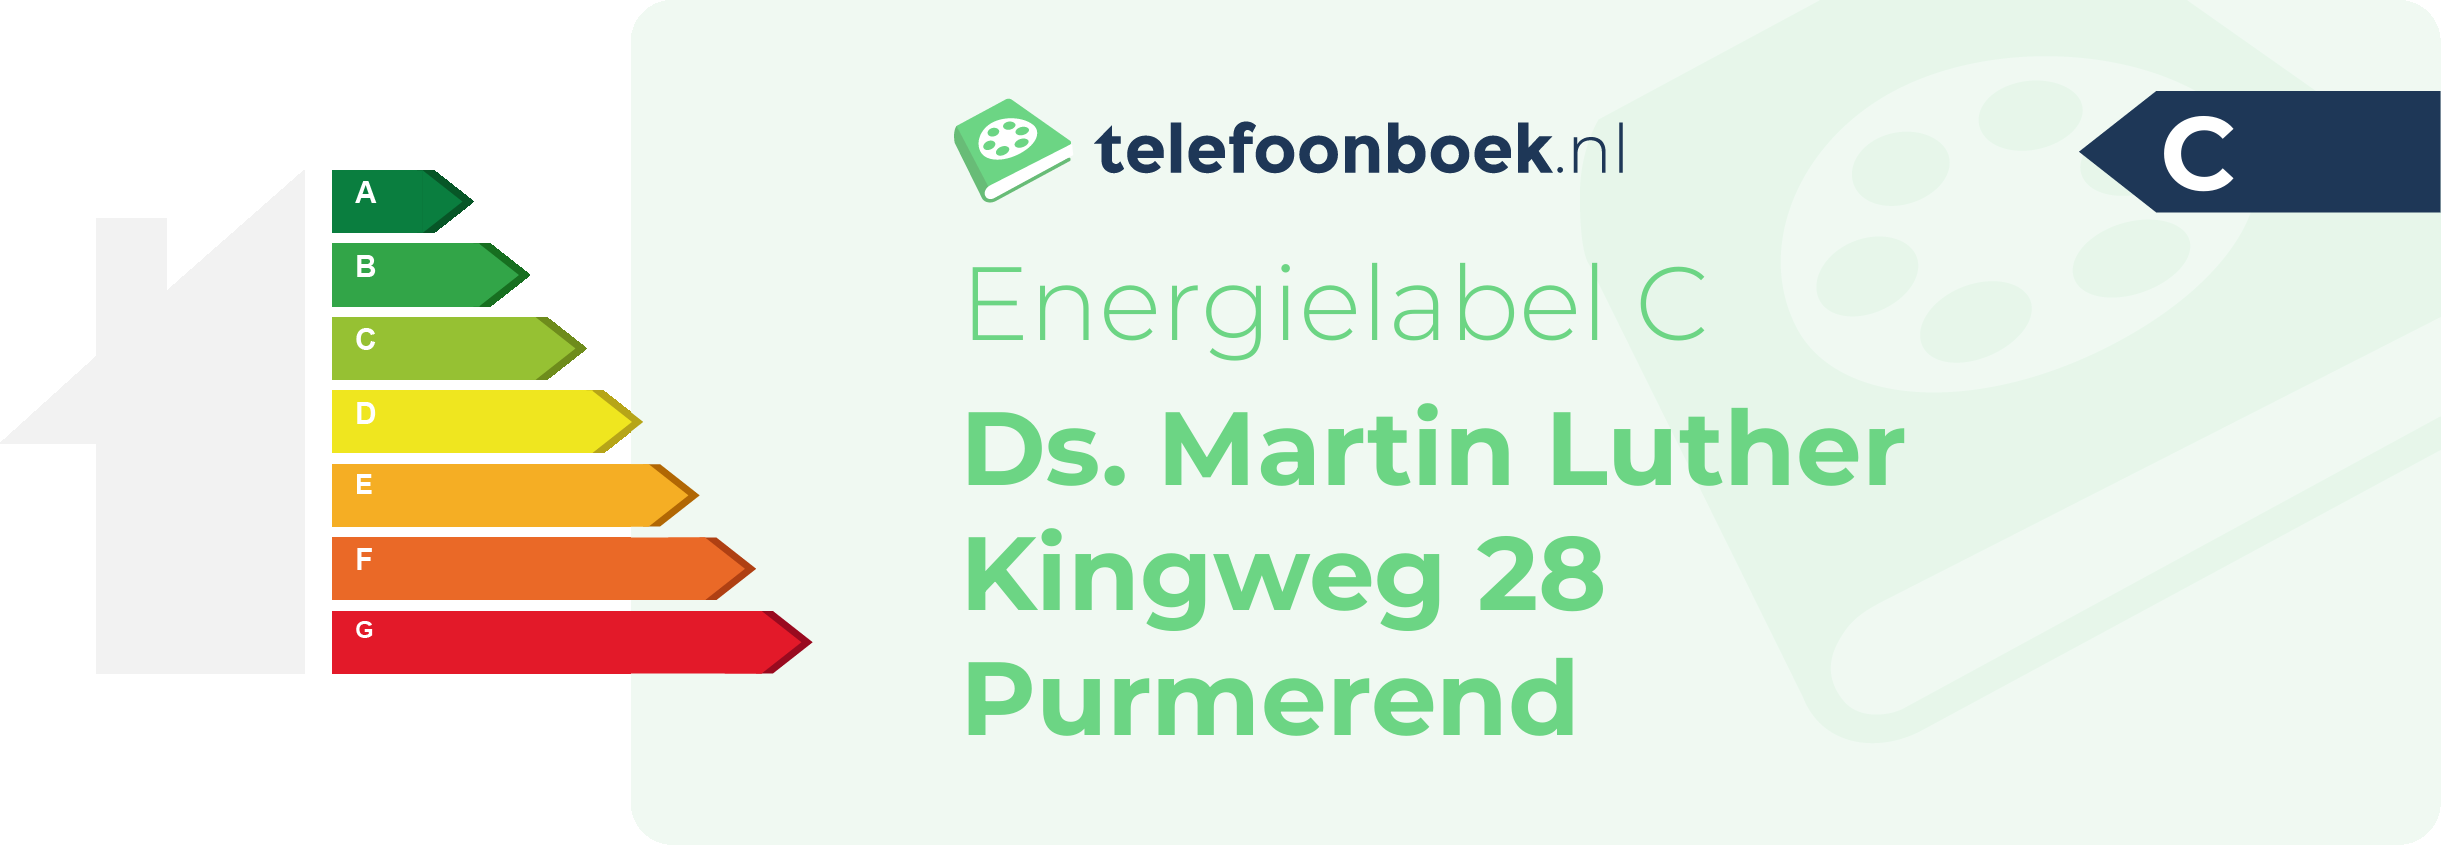 Energielabel Ds. Martin Luther Kingweg 28 Purmerend